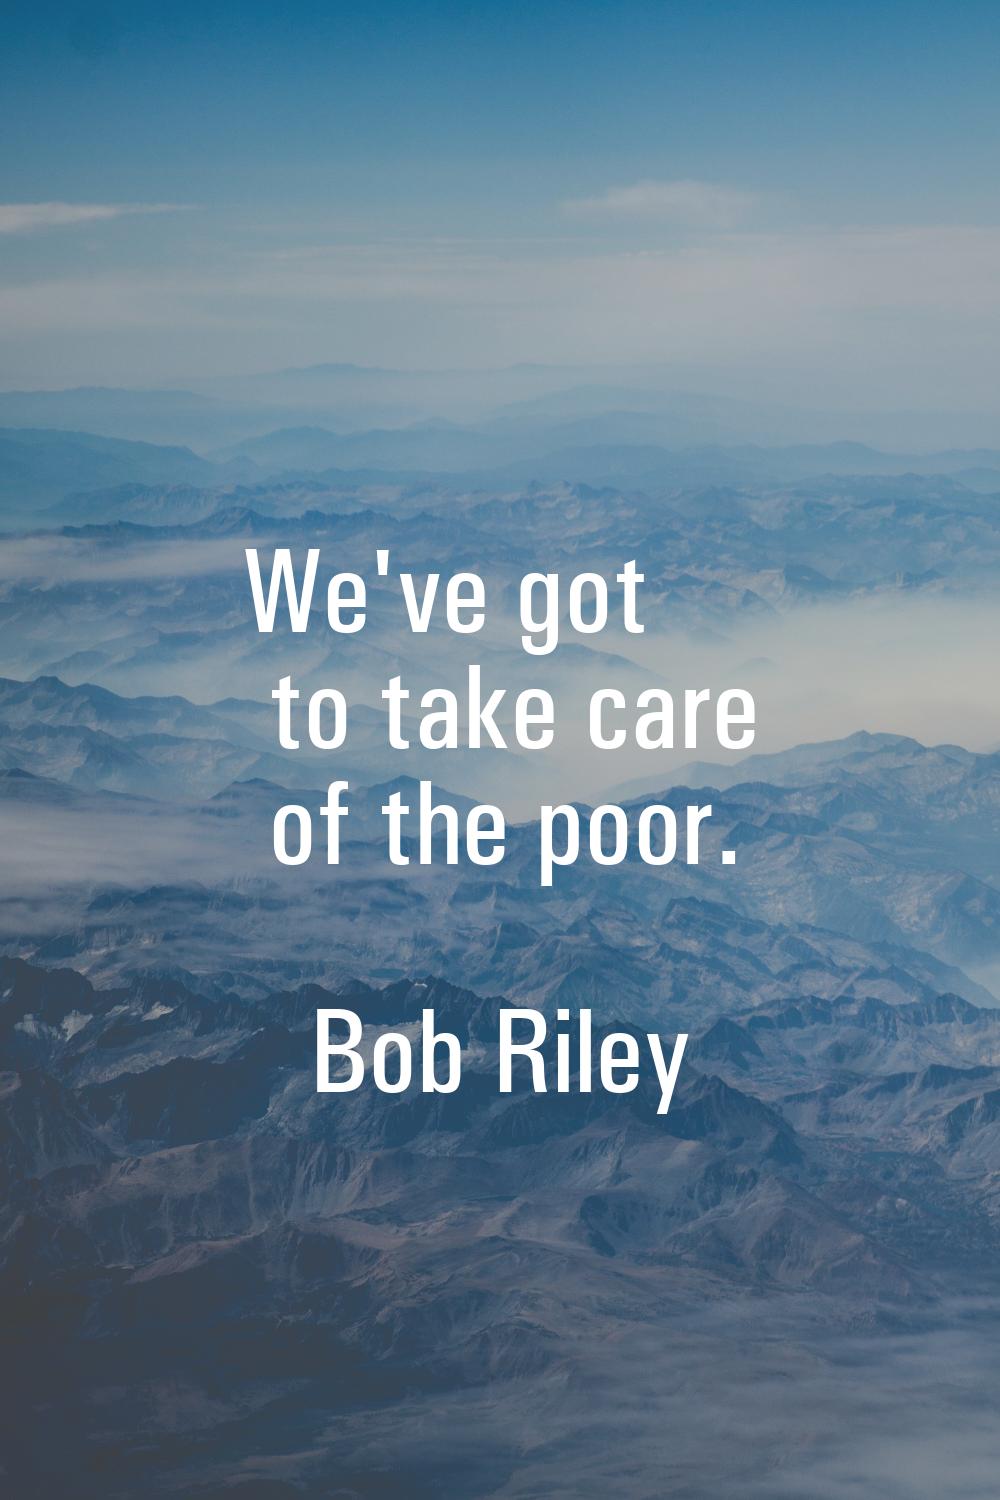 We've got to take care of the poor.